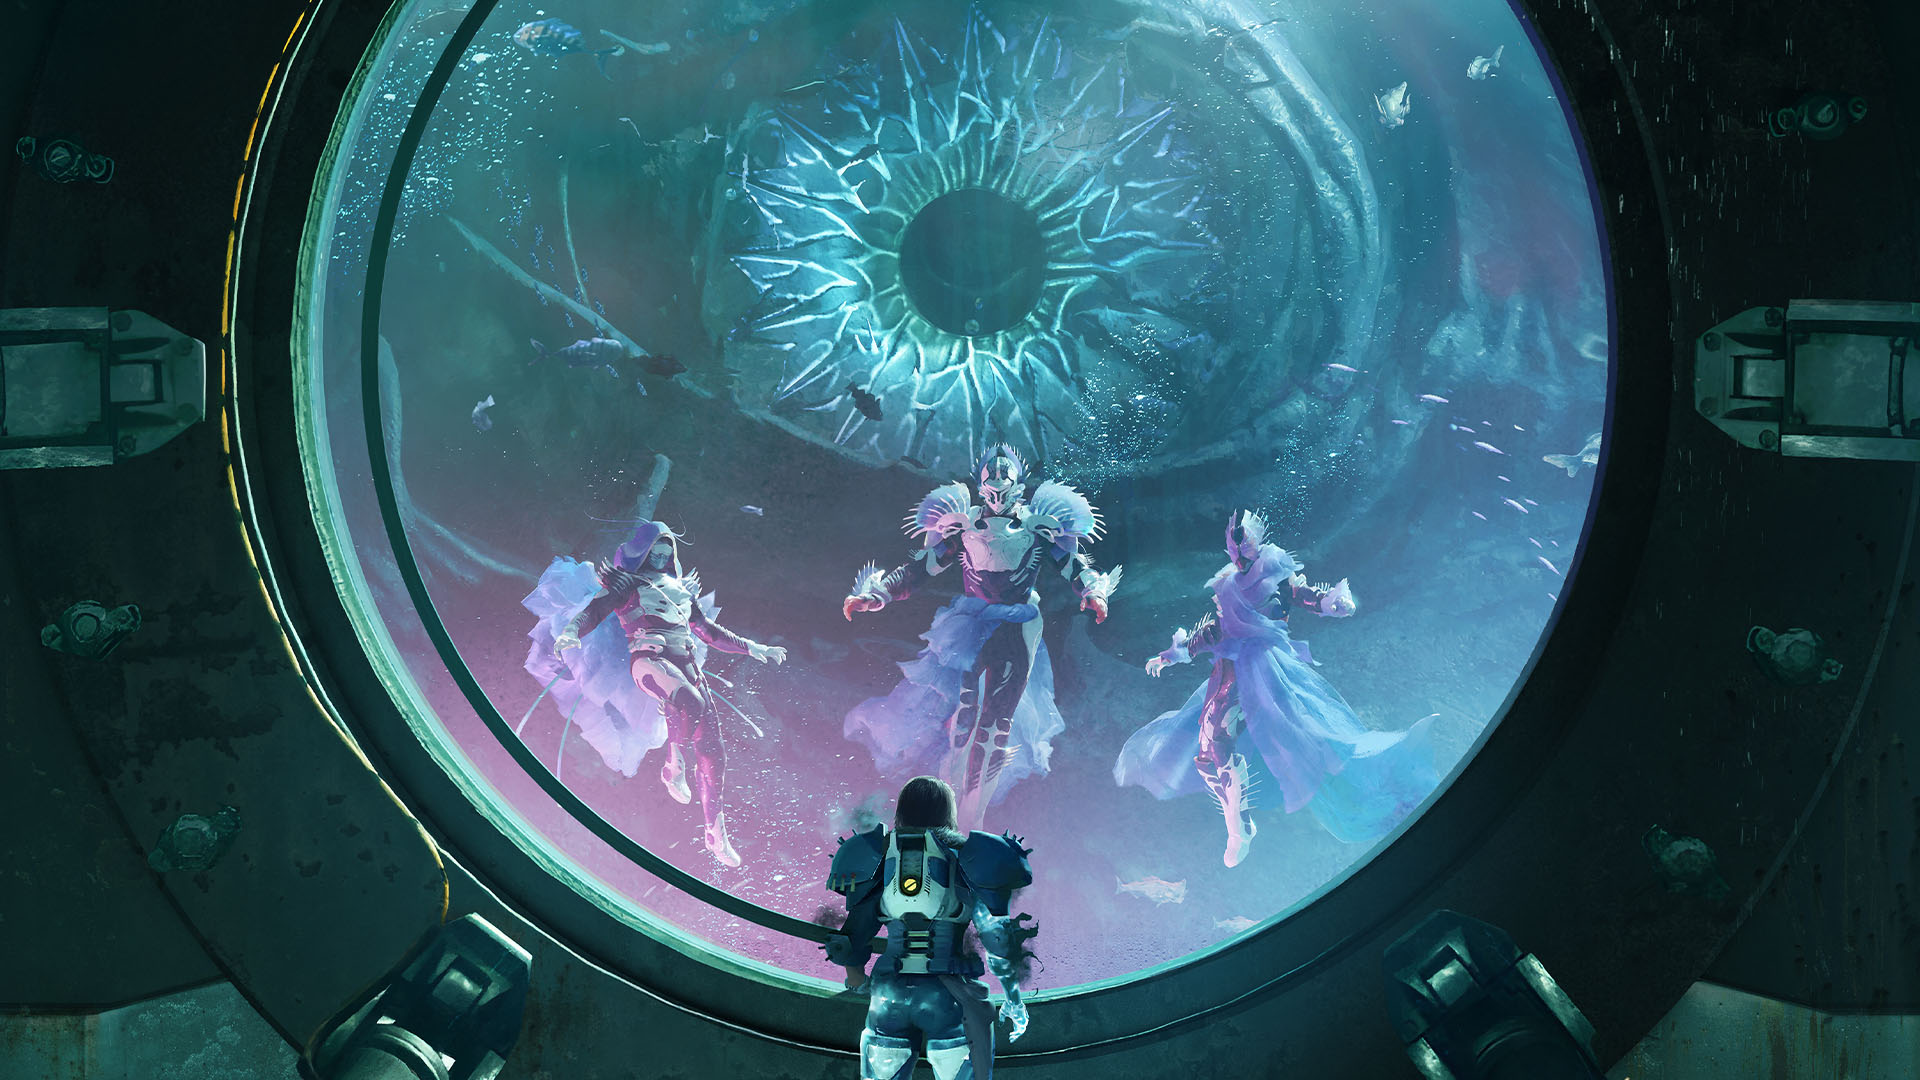 Key art with a returning character facing off against three guardians underwater with a mysterious eye looming behind them.